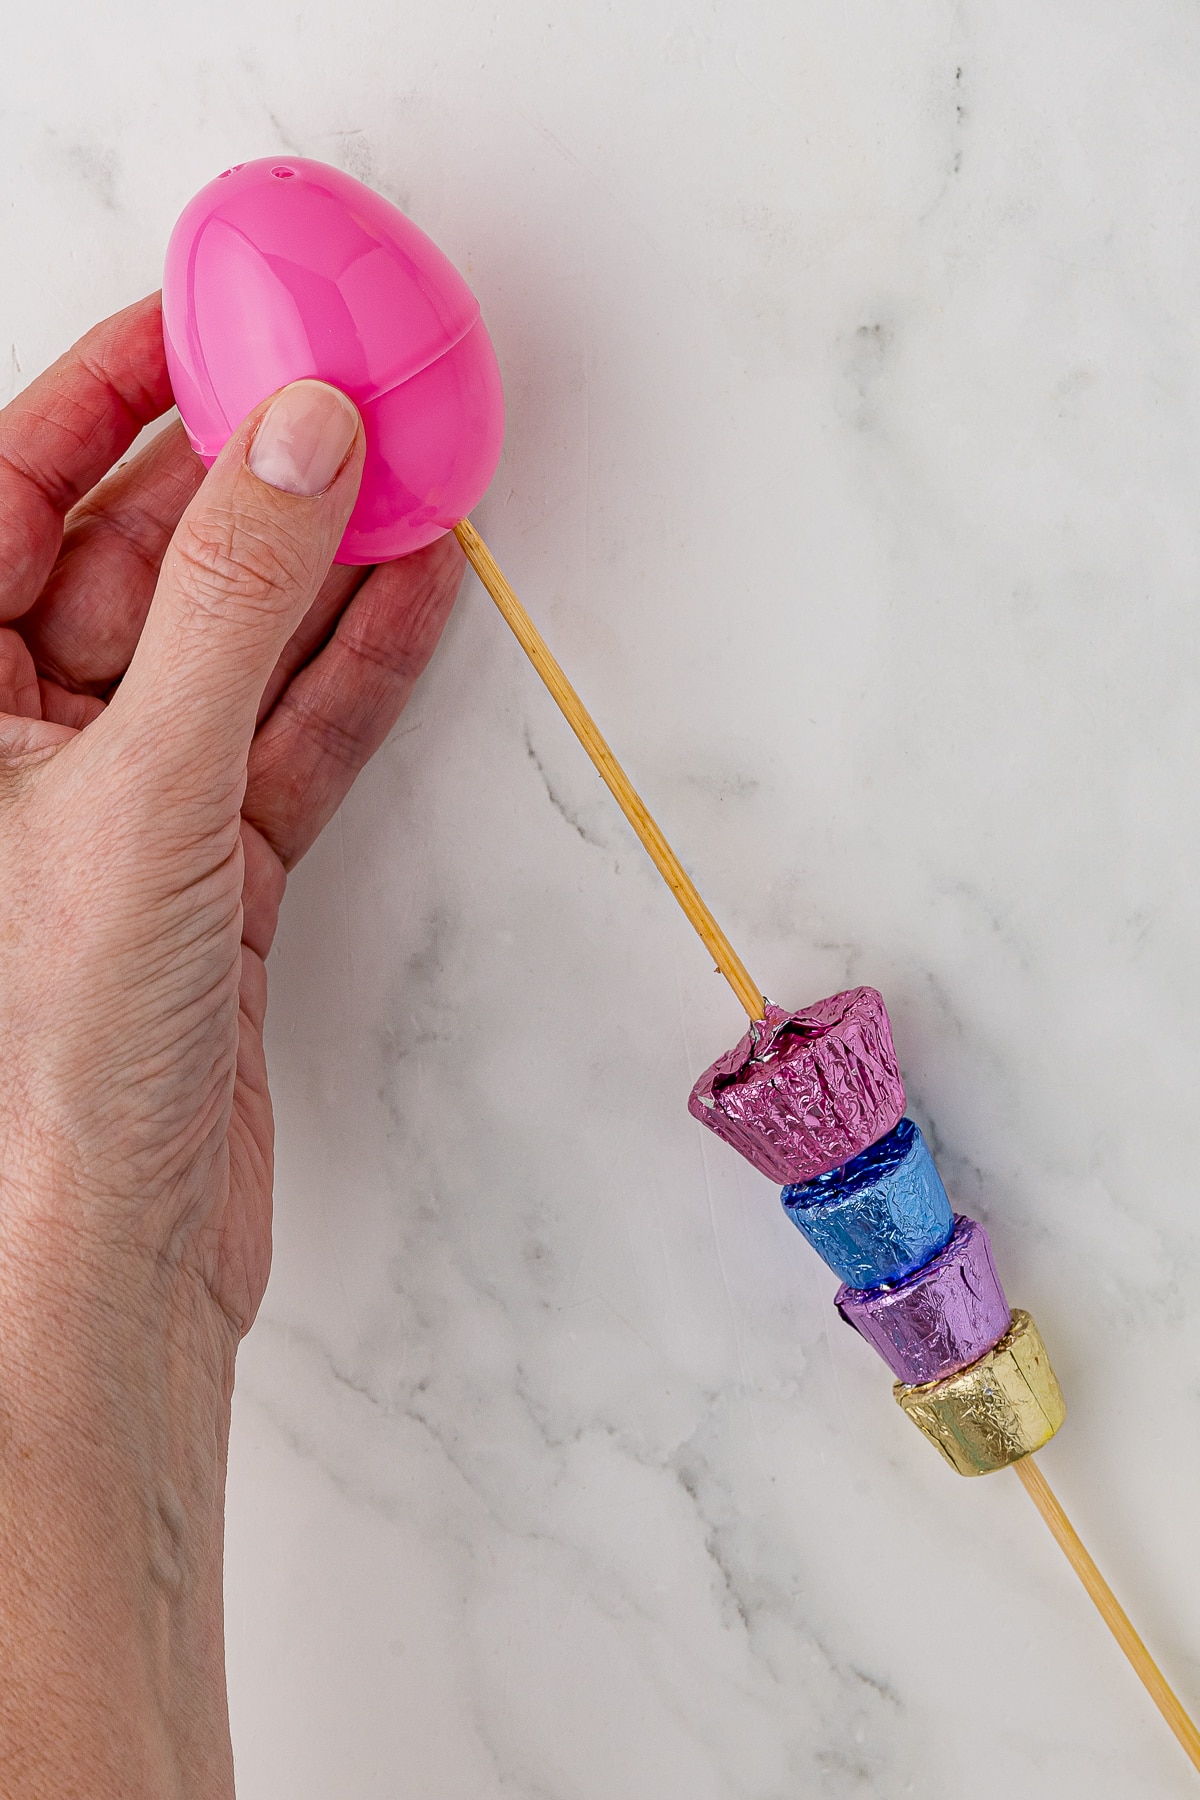 putting a skewer through a pink plastic fillable egg. The skewer has a reese's peanut butter cup and three rolos already on the skewer